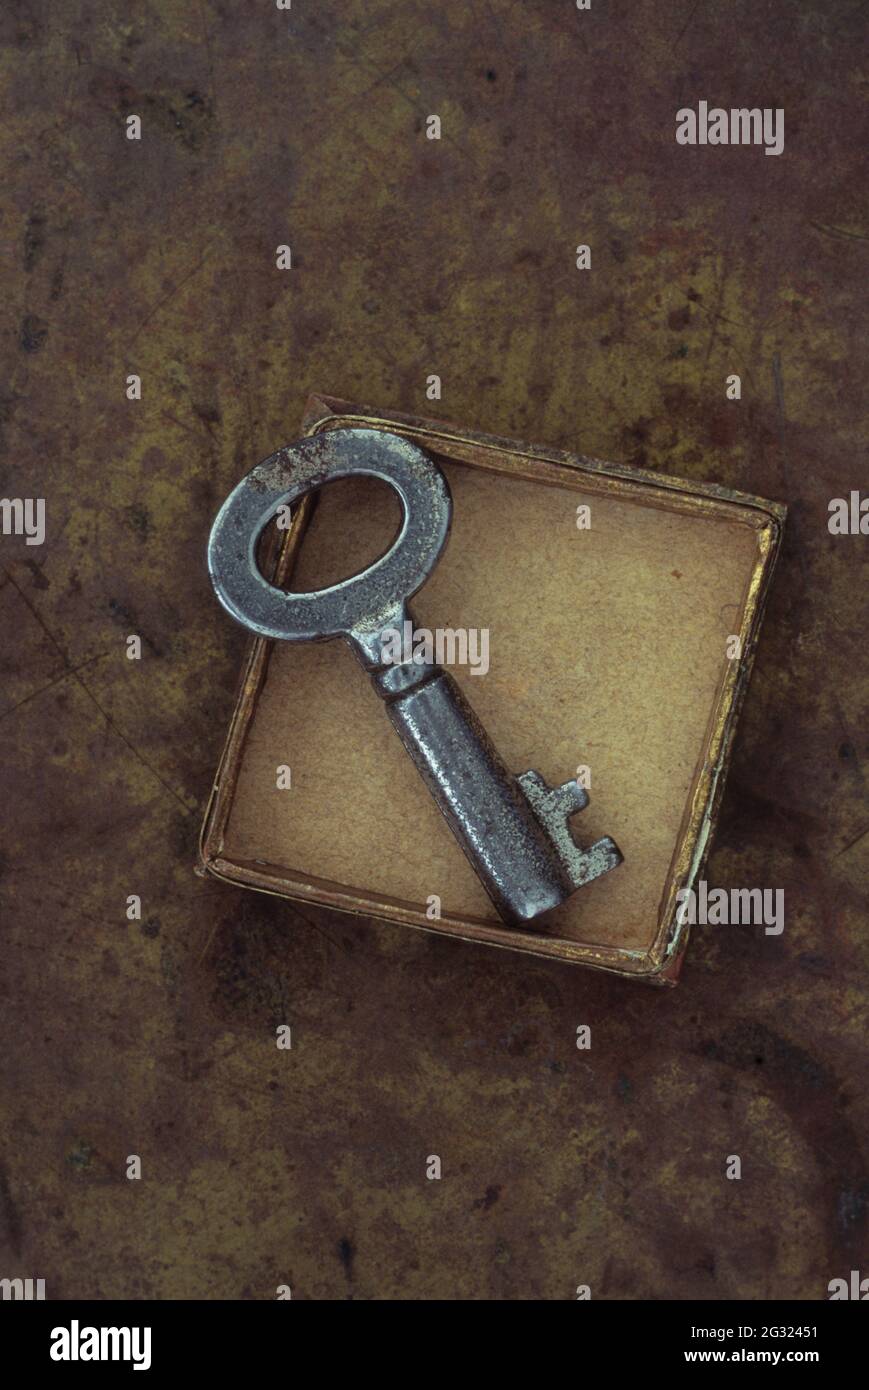 Small cardboard  box containing vintage used silver key Stock Photo